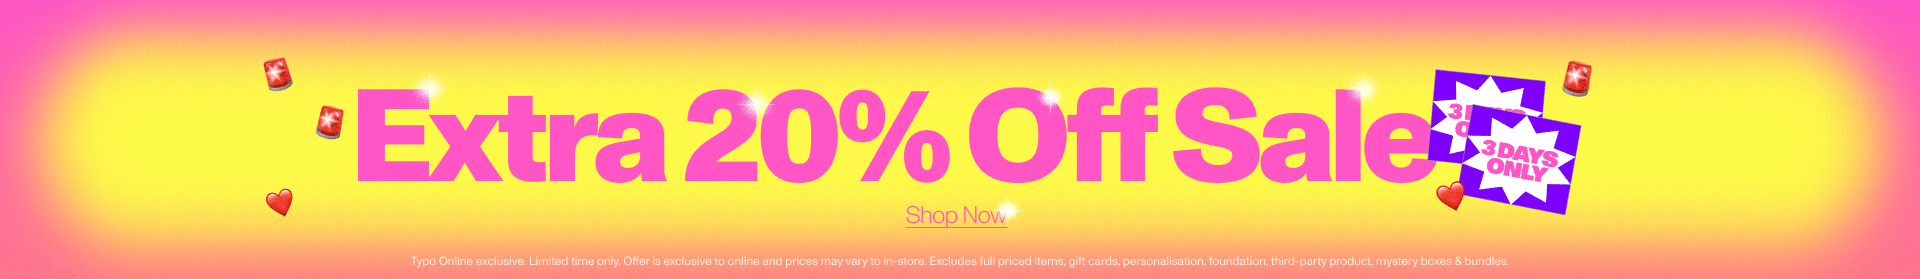 Extra 20% off sale. Shop now.